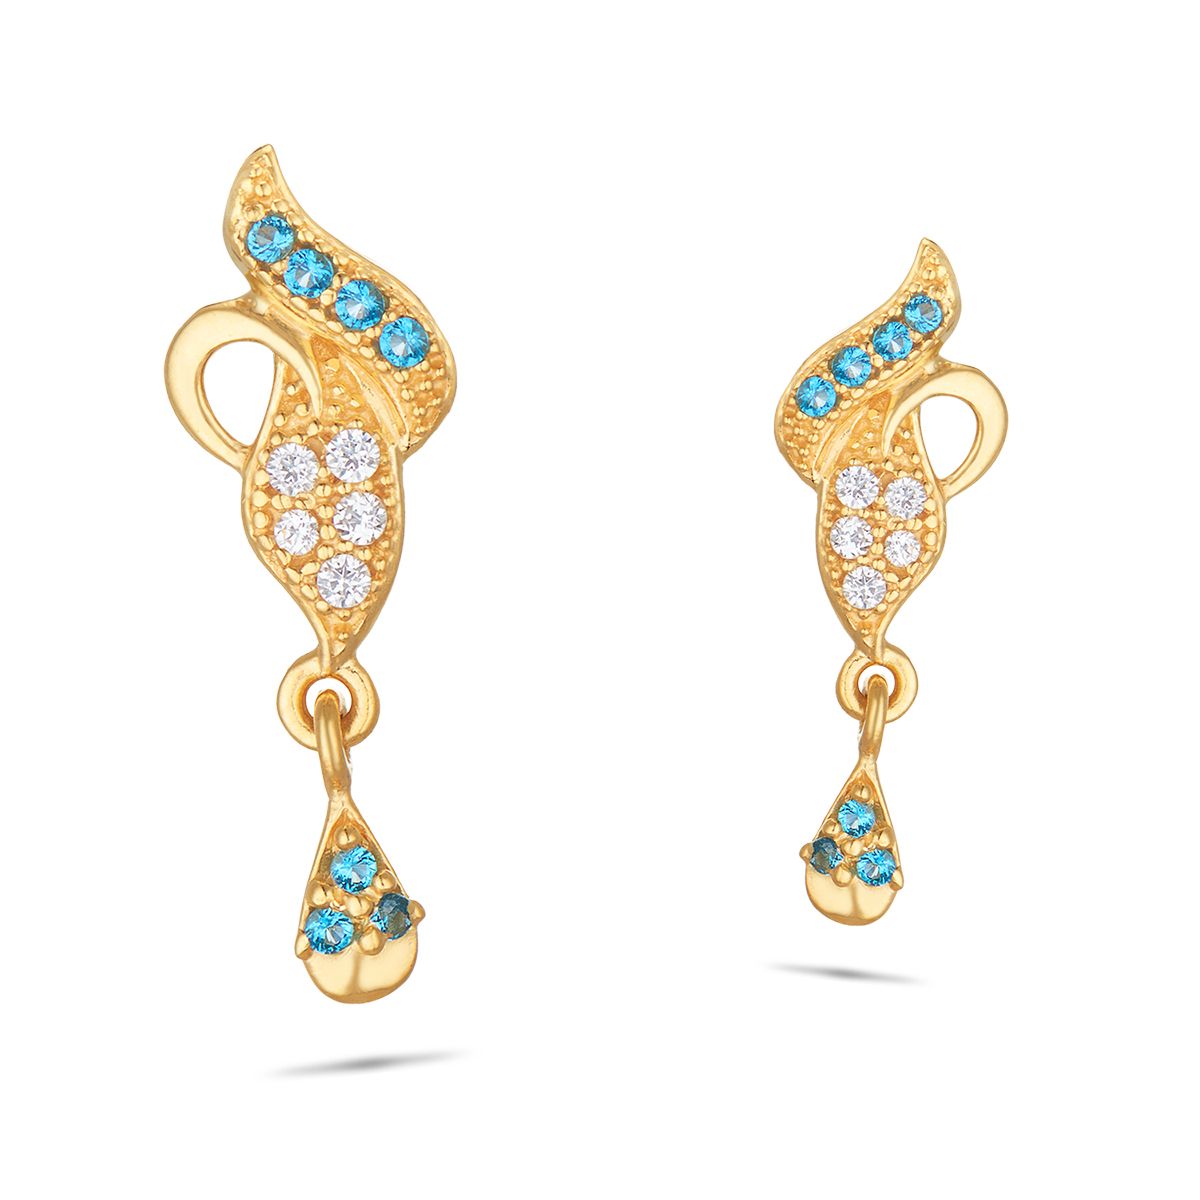 24K Gold Earrings New Arrival New Model High Quality Pretty Golden Jew –  BGSM BOUTIQUE